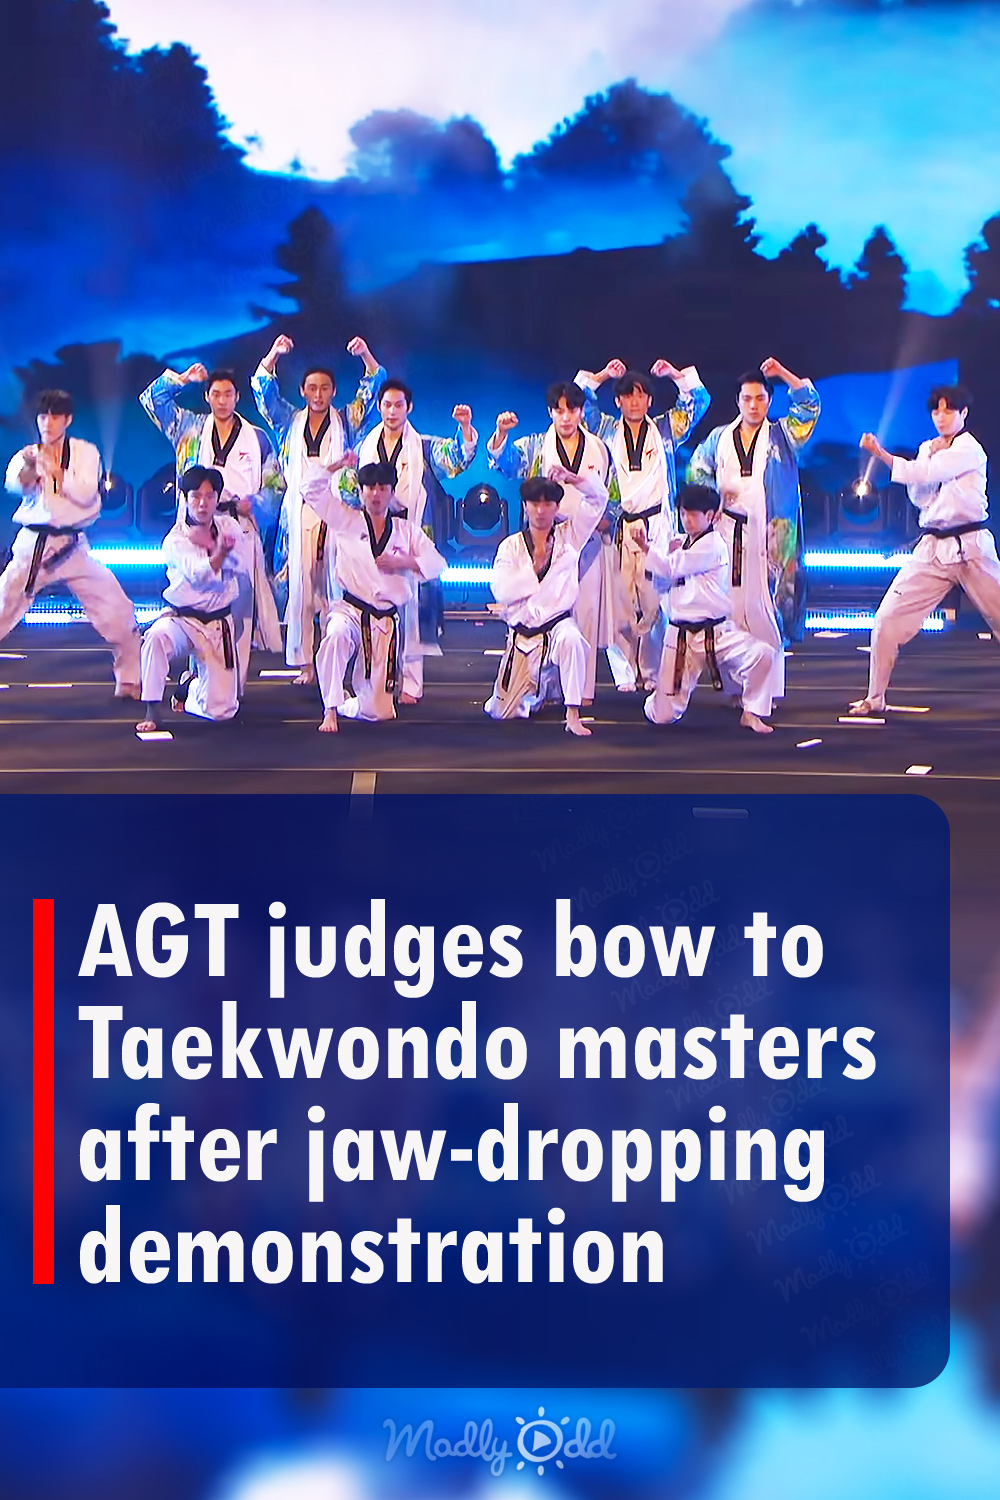 AGT judges bow to Taekwondo masters after jaw-dropping demonstration